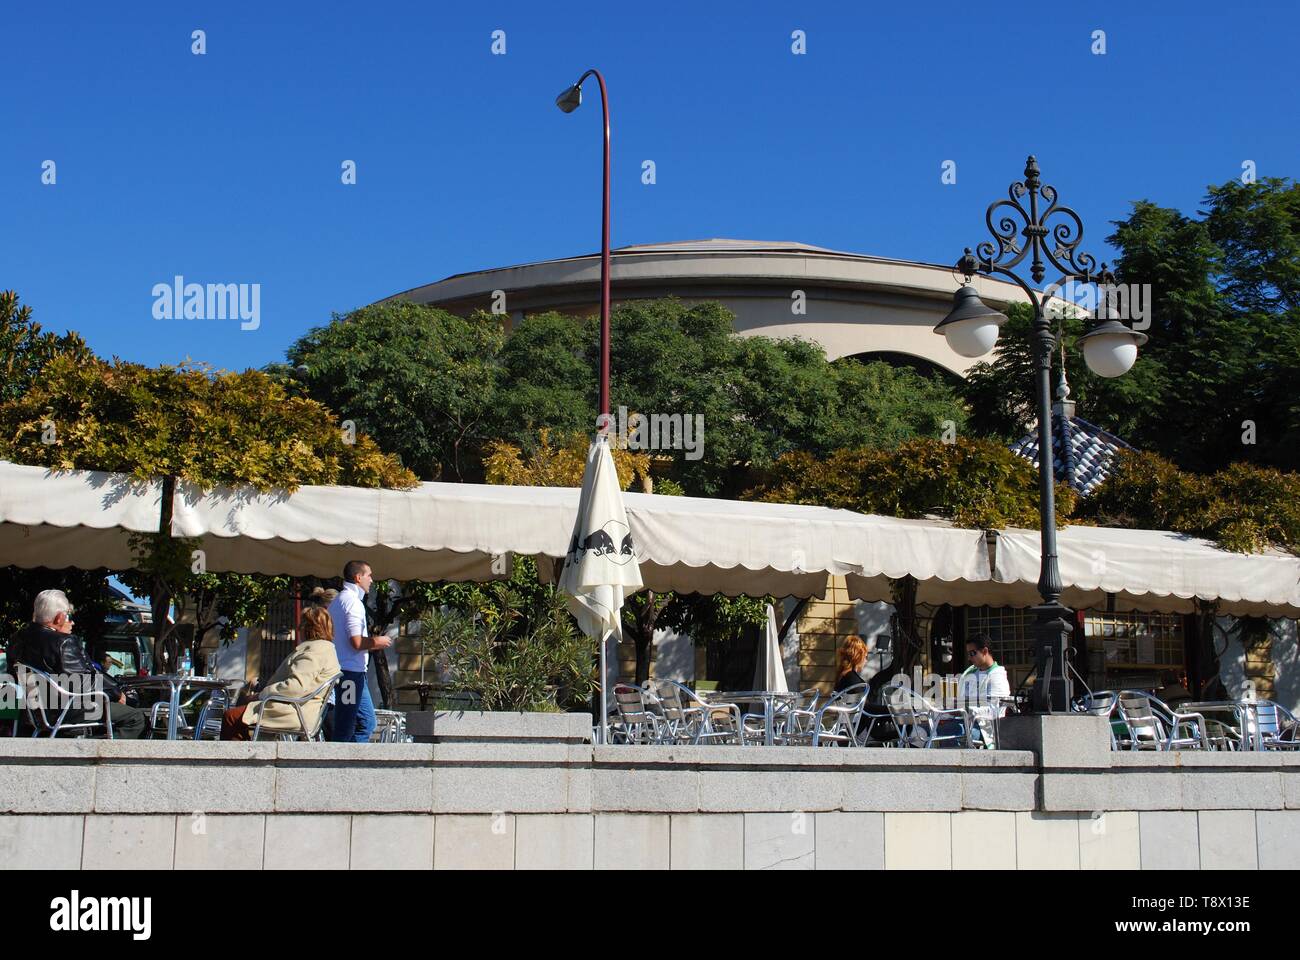 People relaxing at pavement cafes with the Maestranza theatre to the rear, Seville, Seville Province, Andalusia, Spain. Stock Photo